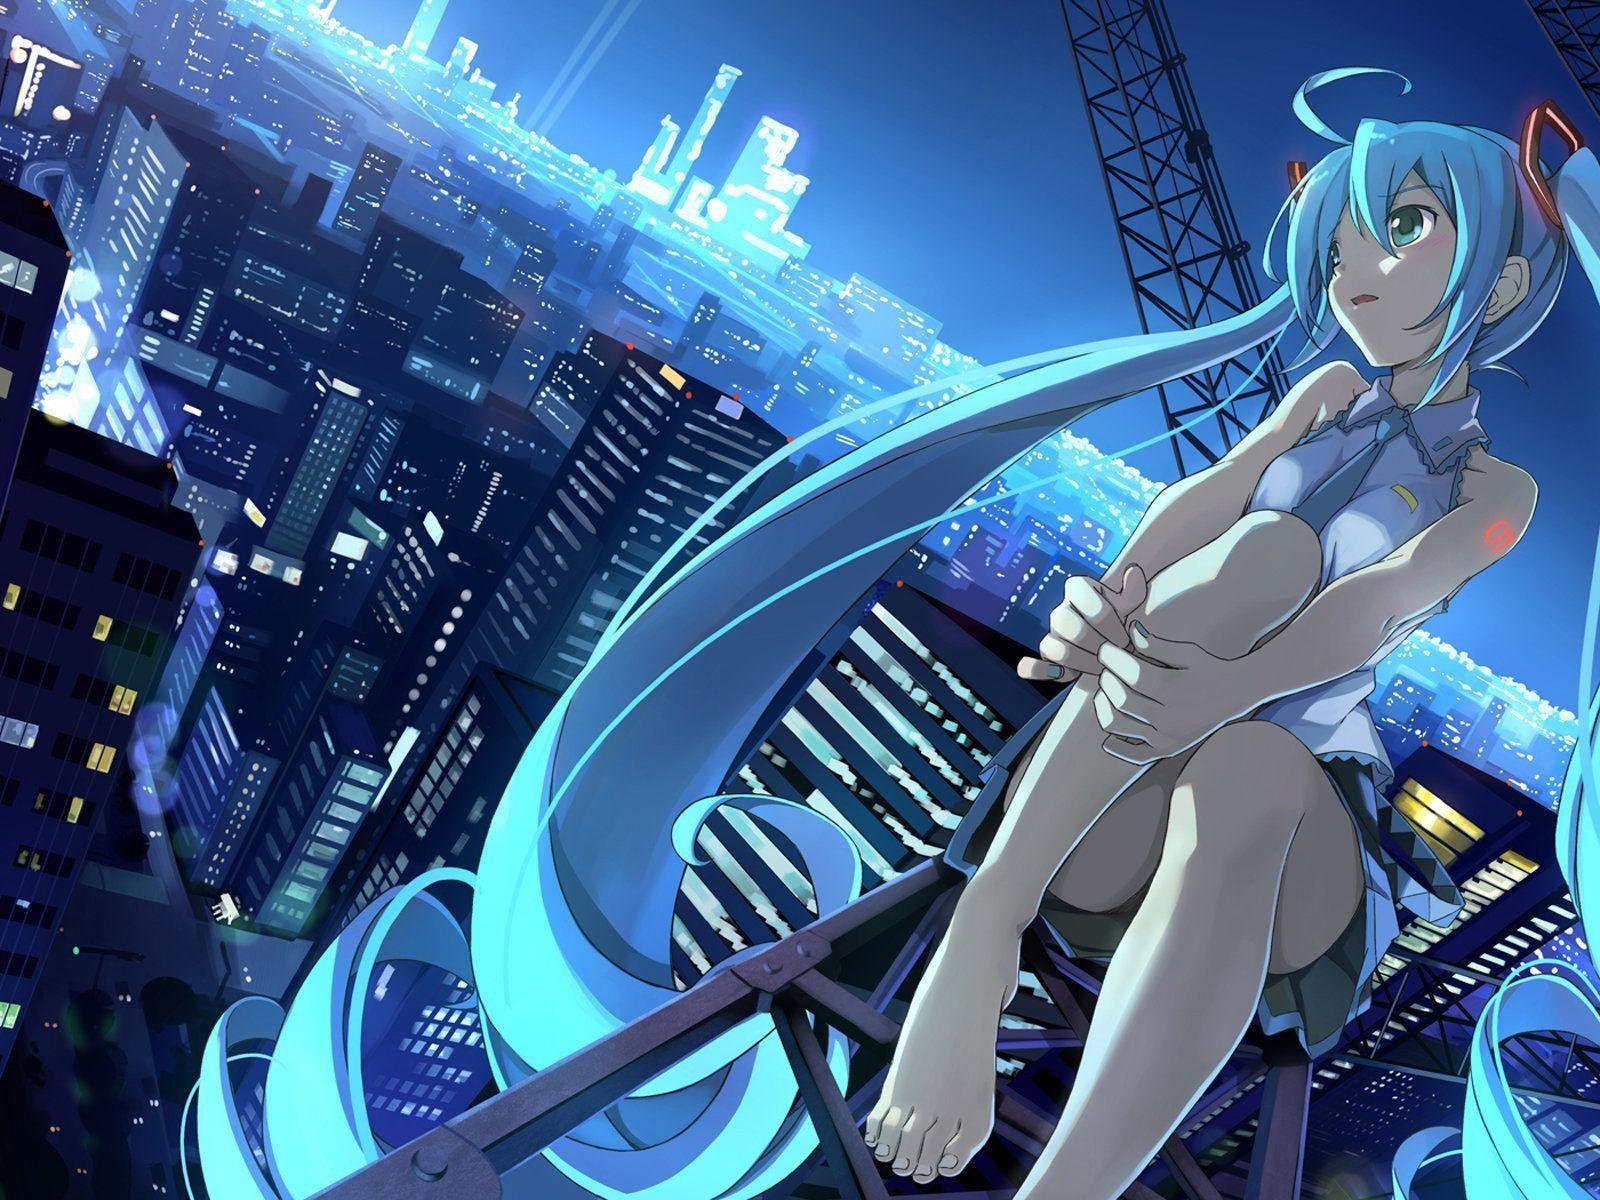 View Anime City Japanese Anime Wallpaper 4k Images My Anime List